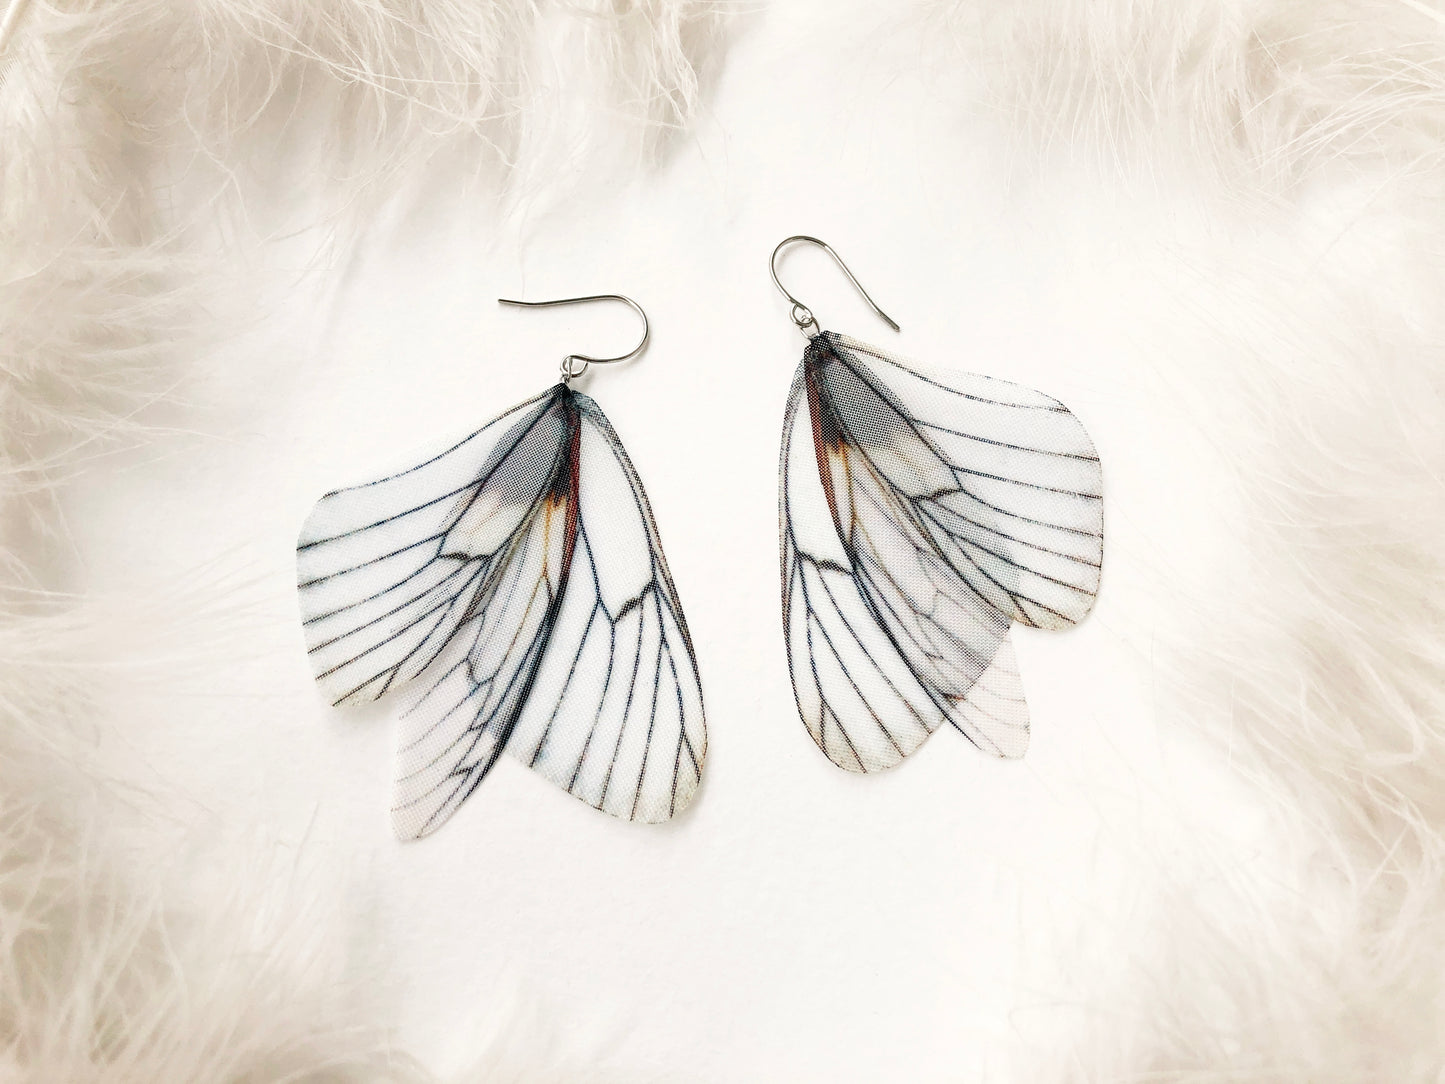 Off-white fairy earrings with dangling wings